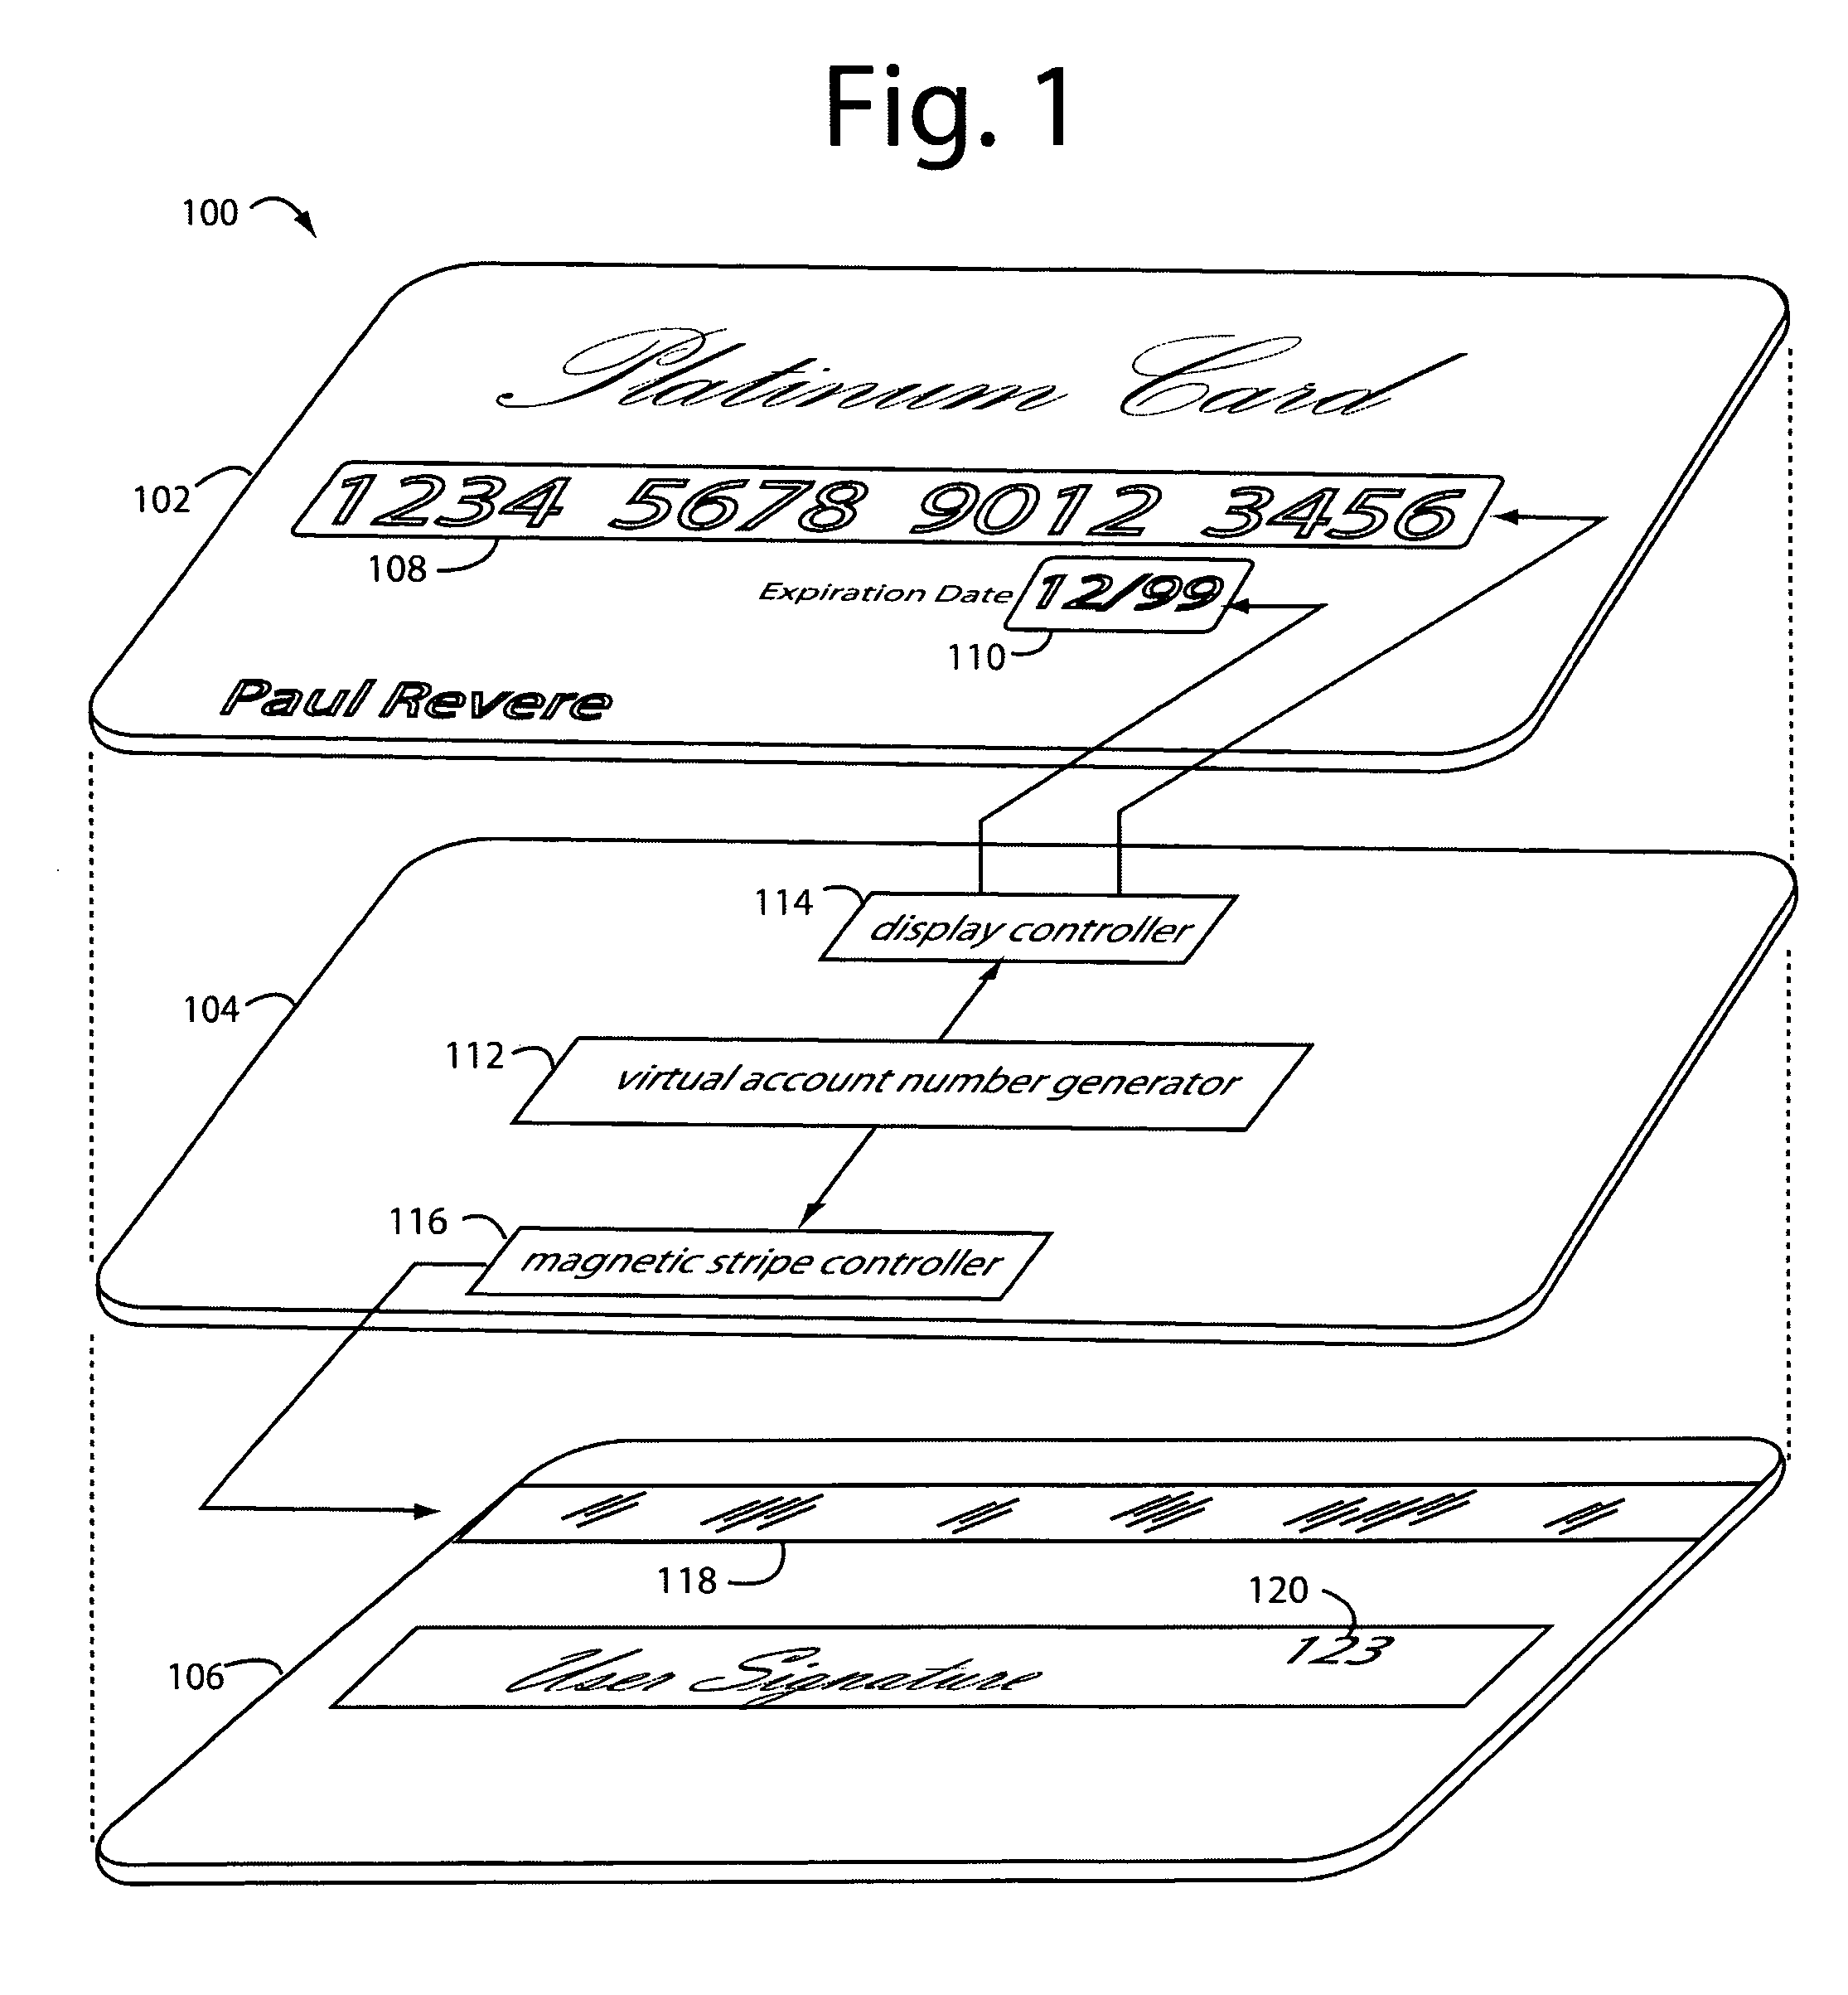 Payment card with internally generated virtual account numbers for its magnetic stripe encoder and user display